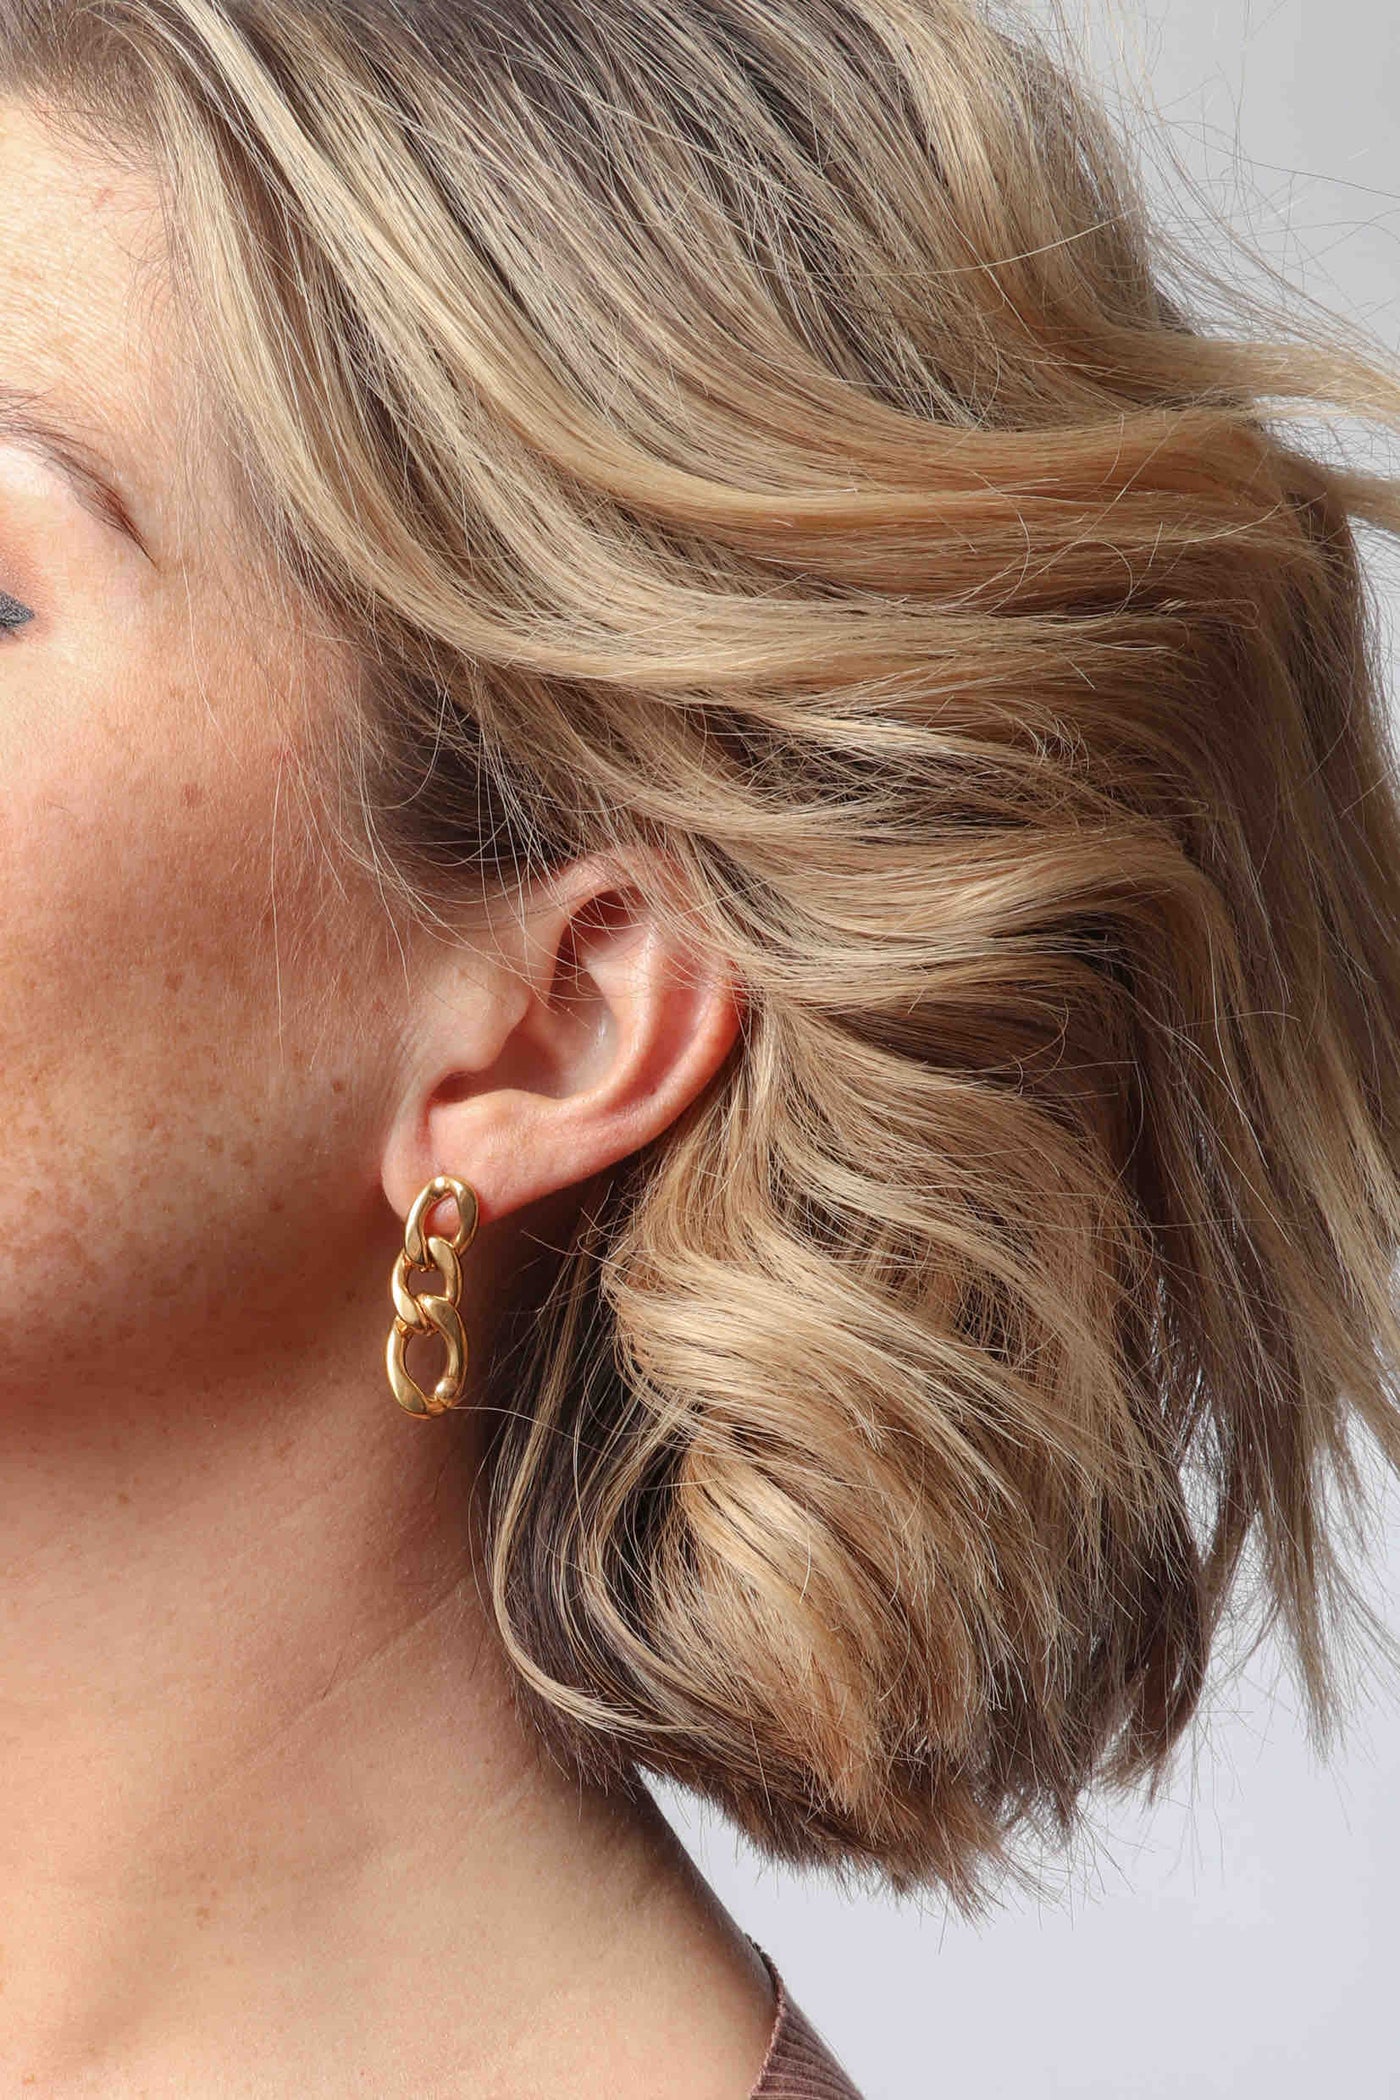 Marrin Costello wearing Marrin Costello Jewelry Queens XL Drops large cuban link post back earrings — for pierced ears. Waterproof, sustainable, hypoallergenic. 14k gold plated stainless steel.